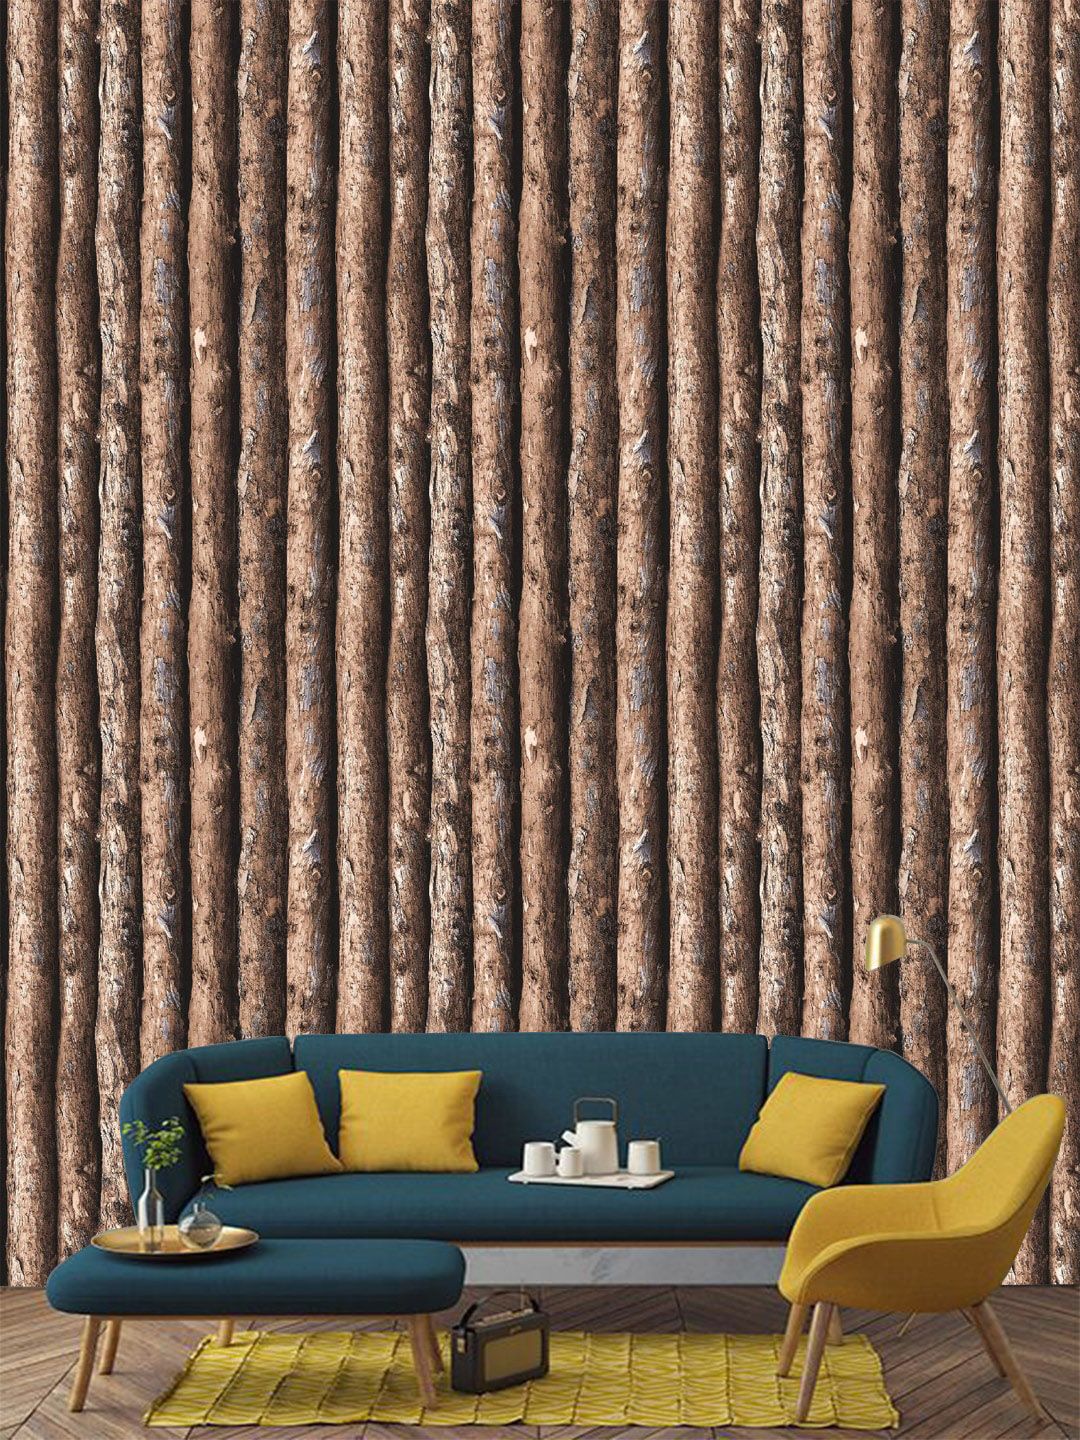 Jaamso Royals Brown Vintage Wooden Bamboo Tree Self Adhesive Wallpaper Price in India